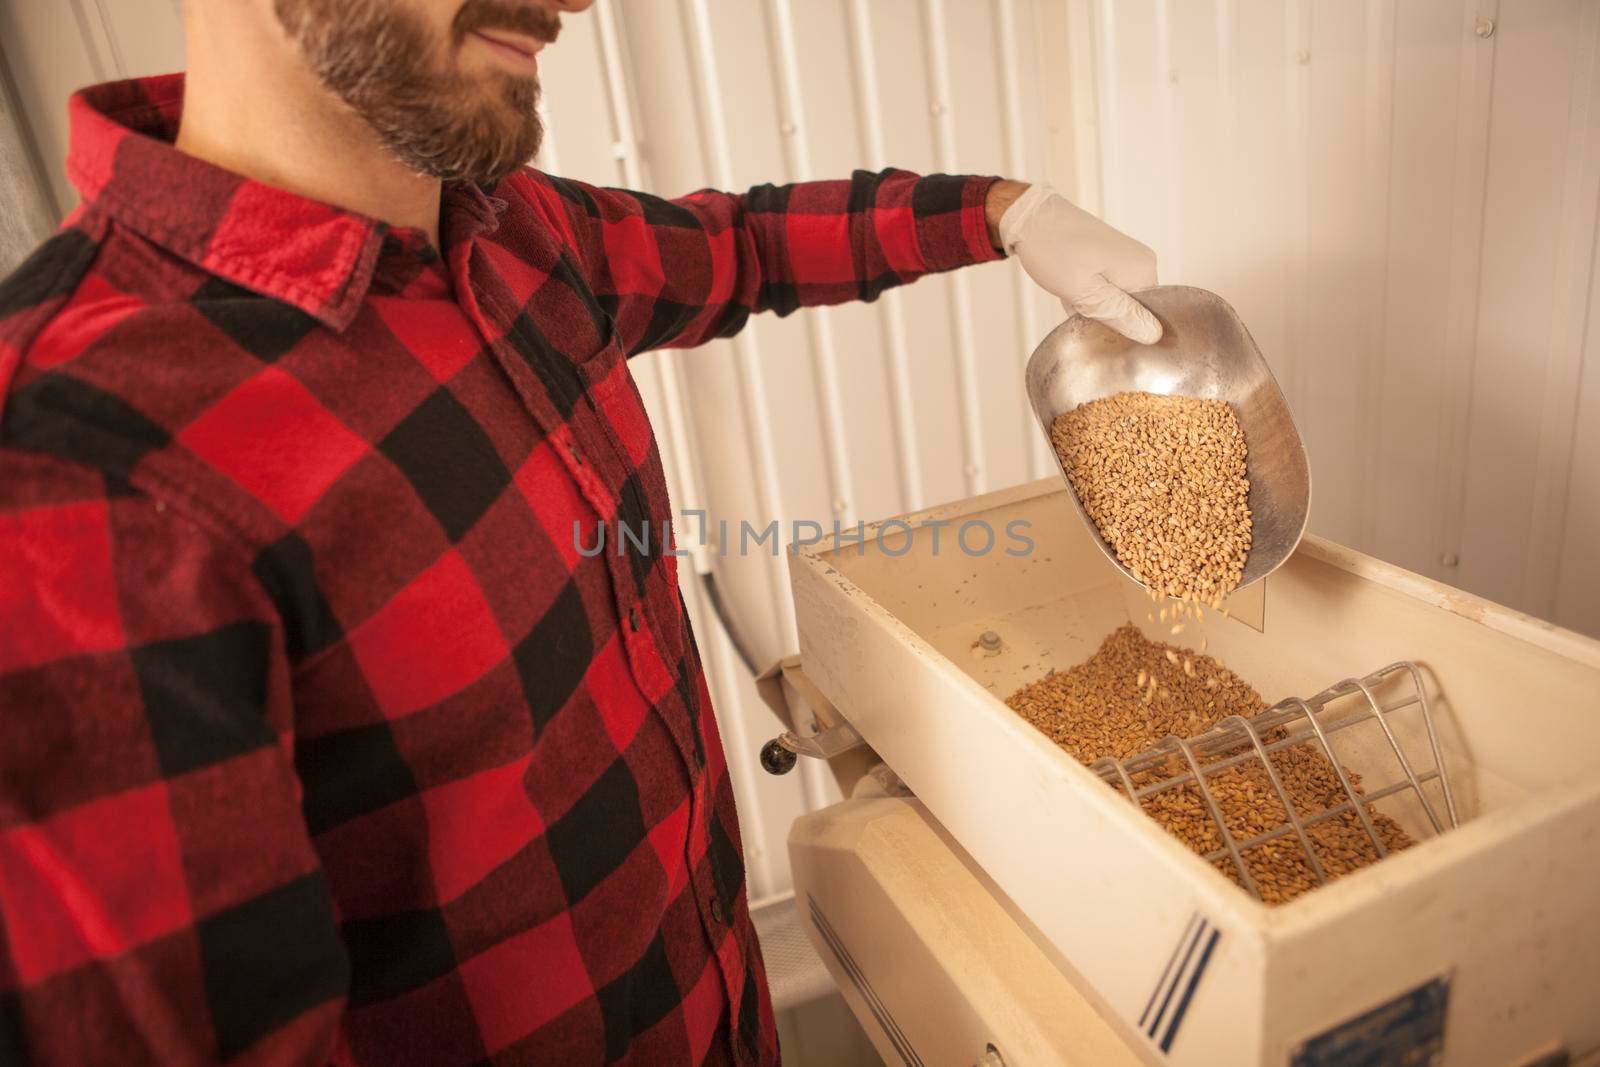 Brewer pouring barley seeds into grain mill at his brewery by MAD_Production